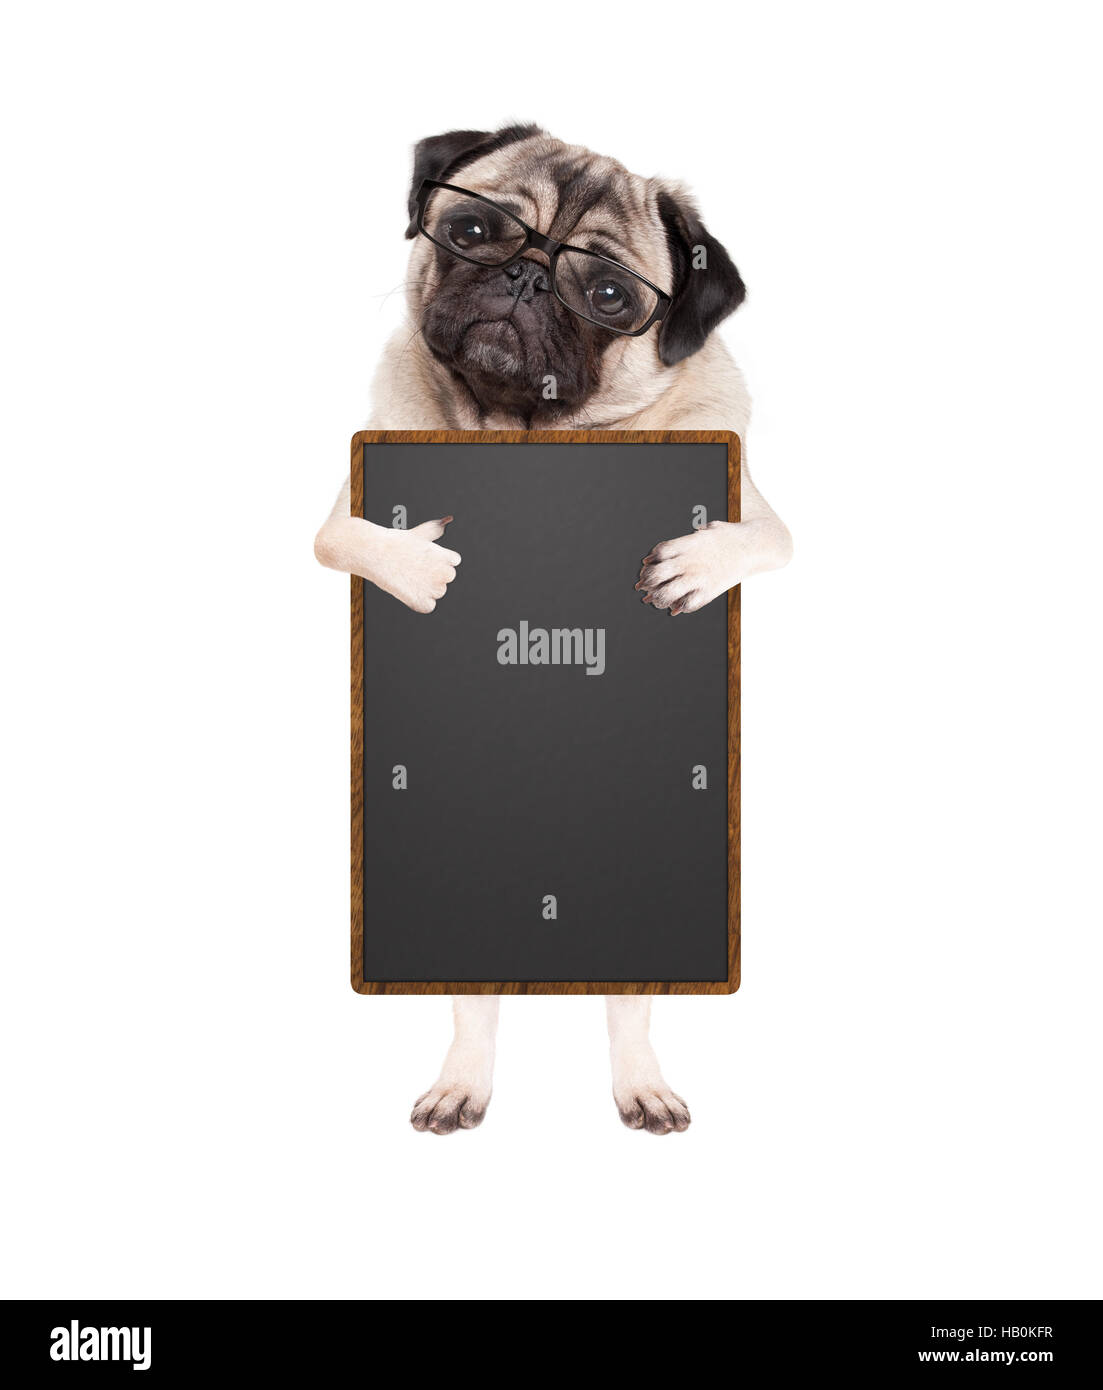 cute pug puppy dog with glasses, standing up holding blank blackboard sign giving  like with thumb, isolated on white background Stock Photo